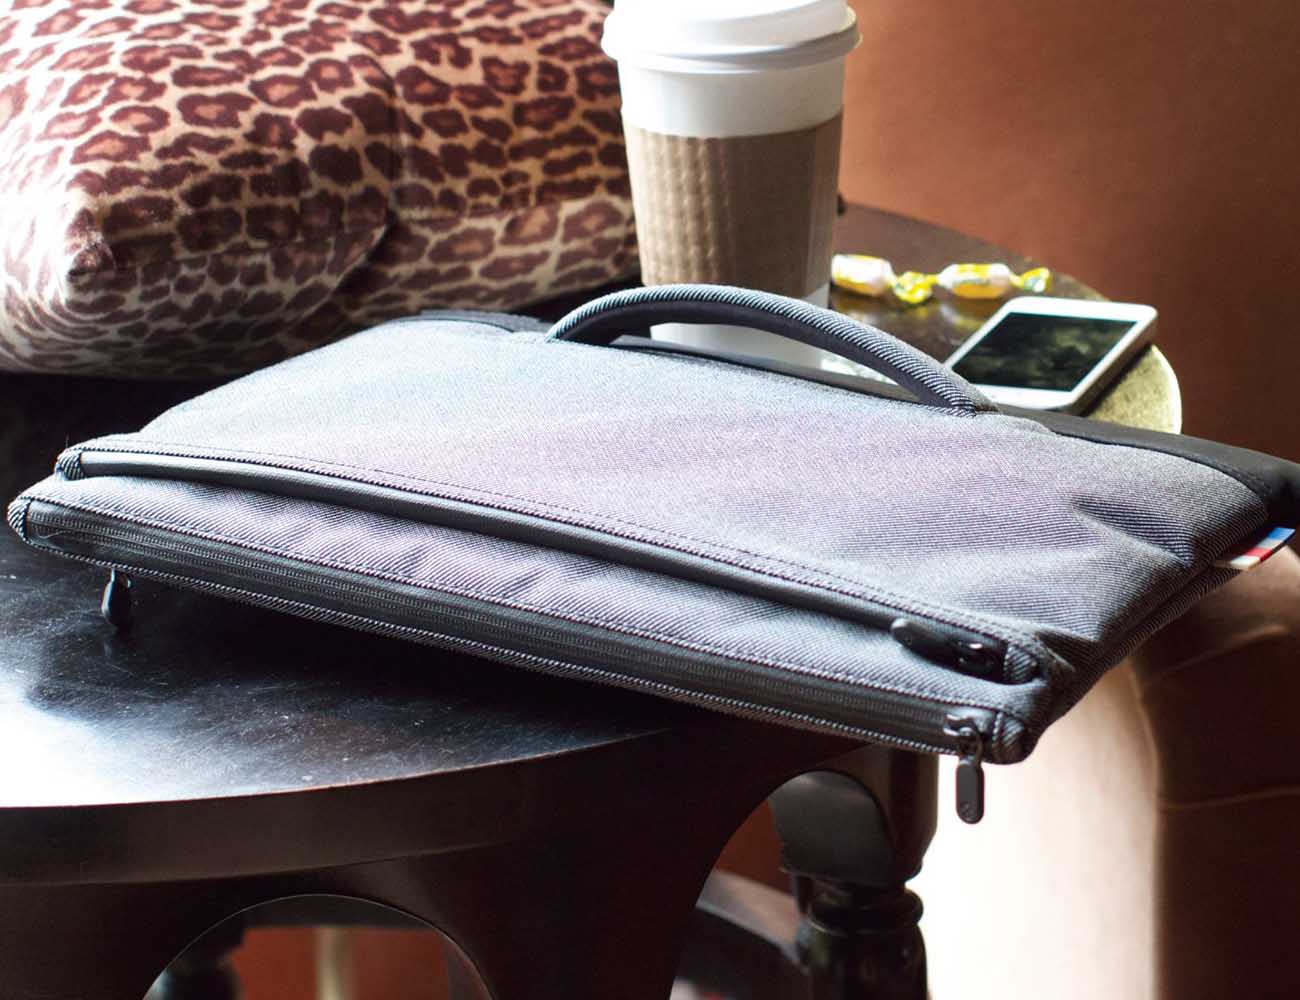 Zurich 11” Laptop Case by Lexdray – Ideal Protection for Laptops, Tablets and E-Readers